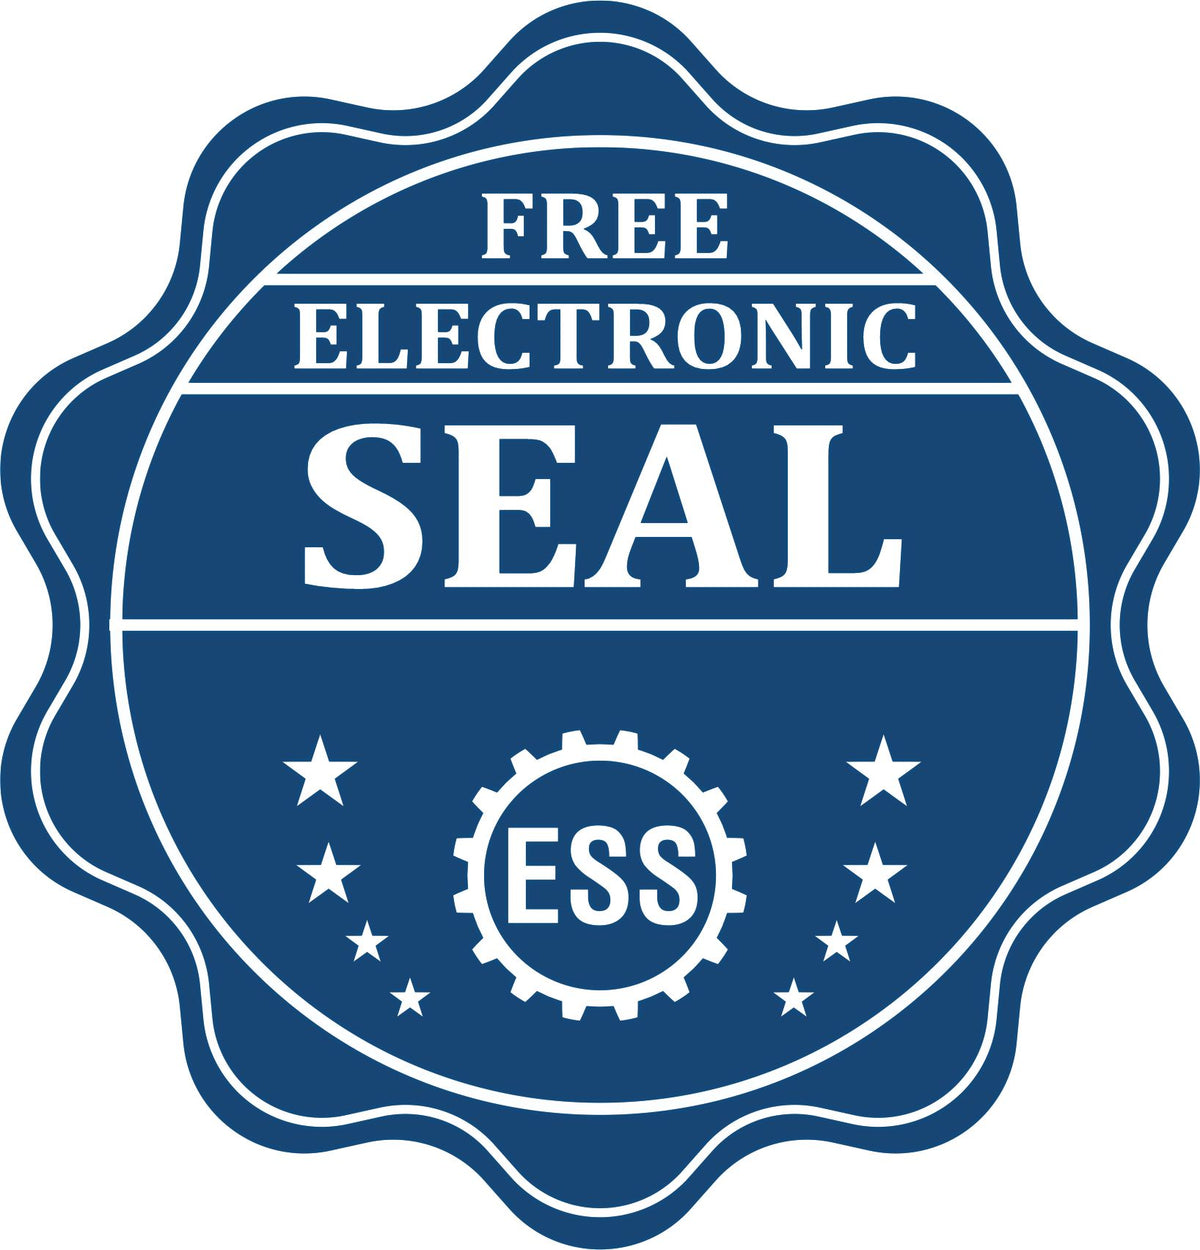 A badge showing a free electronic seal for the Wooden Handle Texas State Seal Notary Public Stamp with stars and the ESS gear on the emblem.